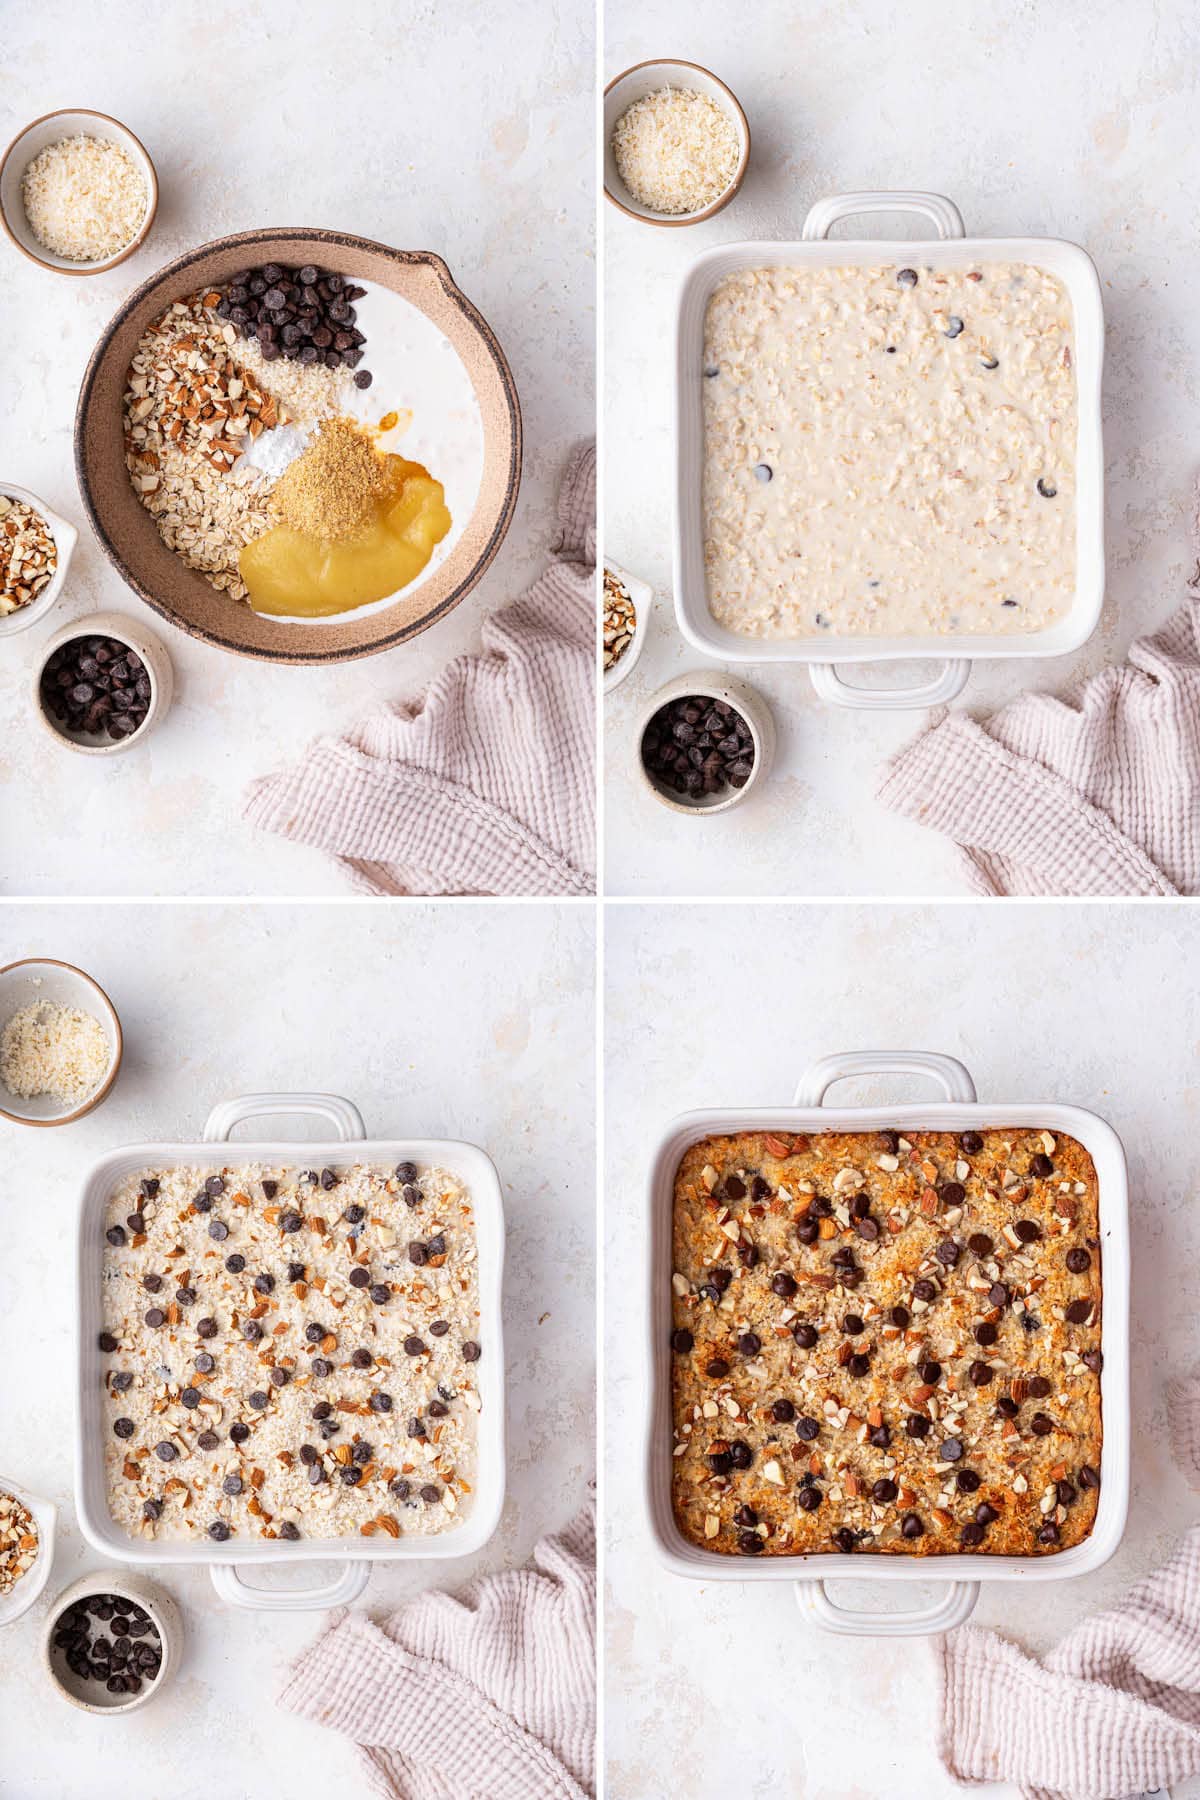 Collage of four photos showing the steps to make Almond Joy Baked Oatmeal: mixing oatmeal batter, pouring into a pan, topping with almonds and chocolate chips and then baking.